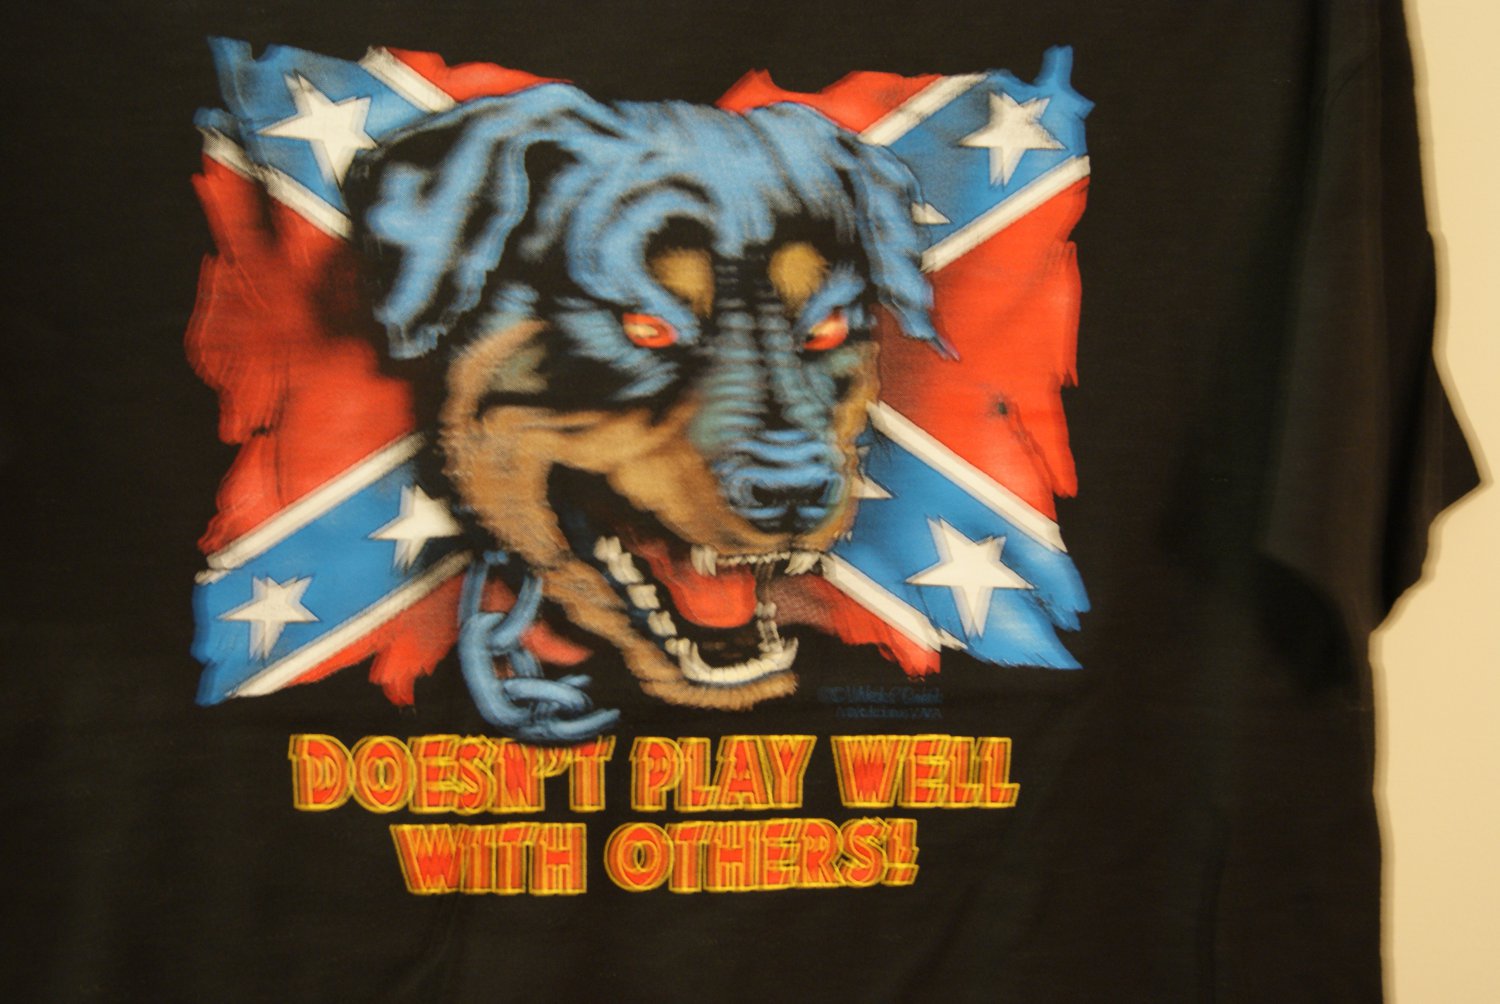 Battle flag tee,...doesn't play well with others